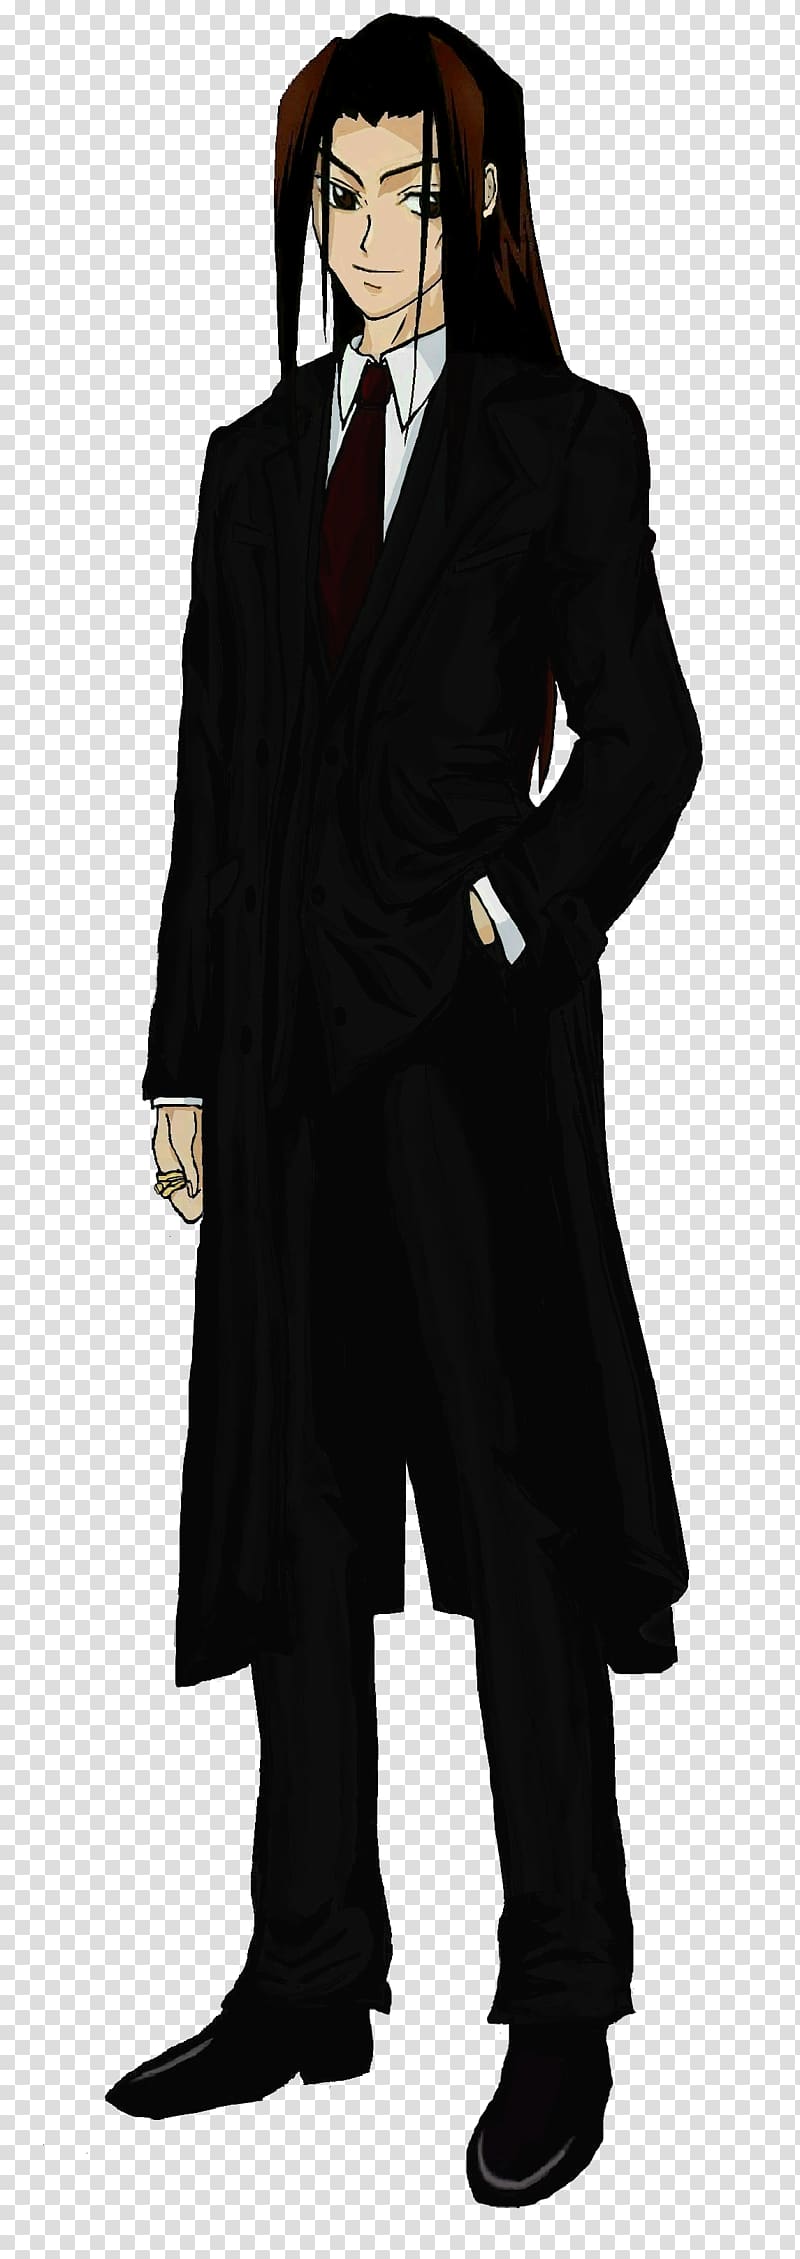 Hao Asakura Character Tuxedo Charmed Robe, others transparent background PNG clipart